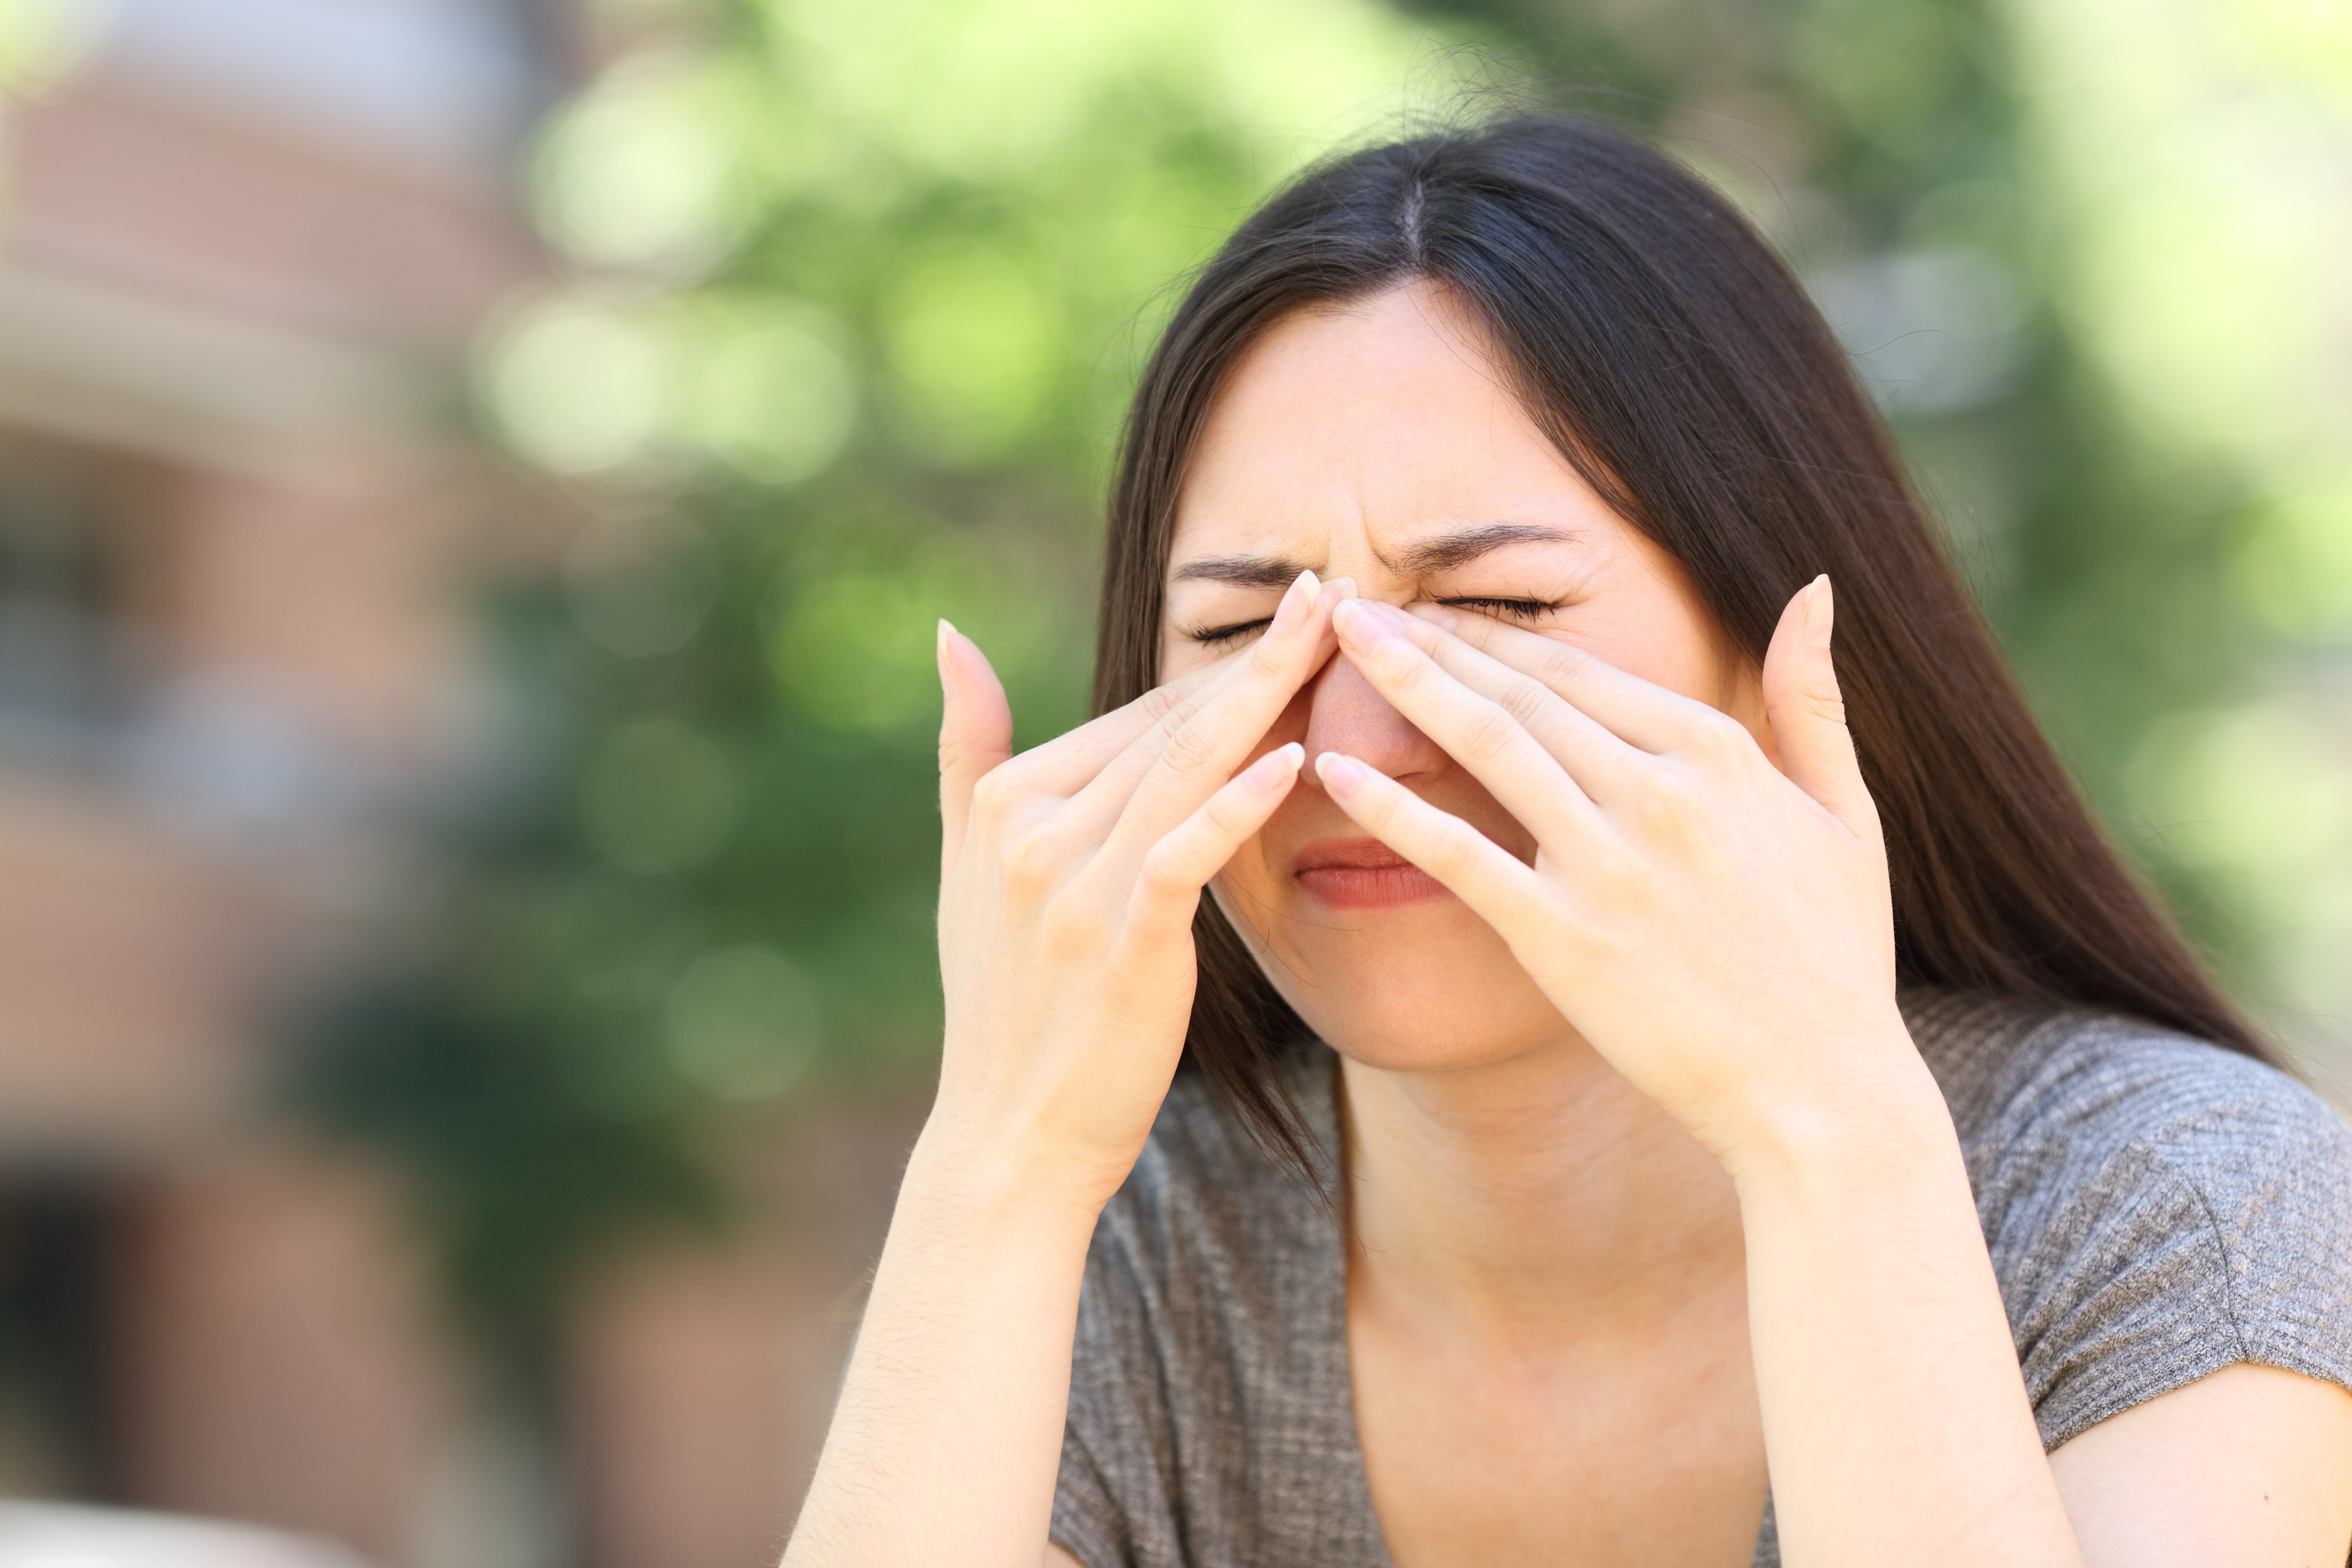 7 Ways to Prevent Dry Eyes in the Summertime